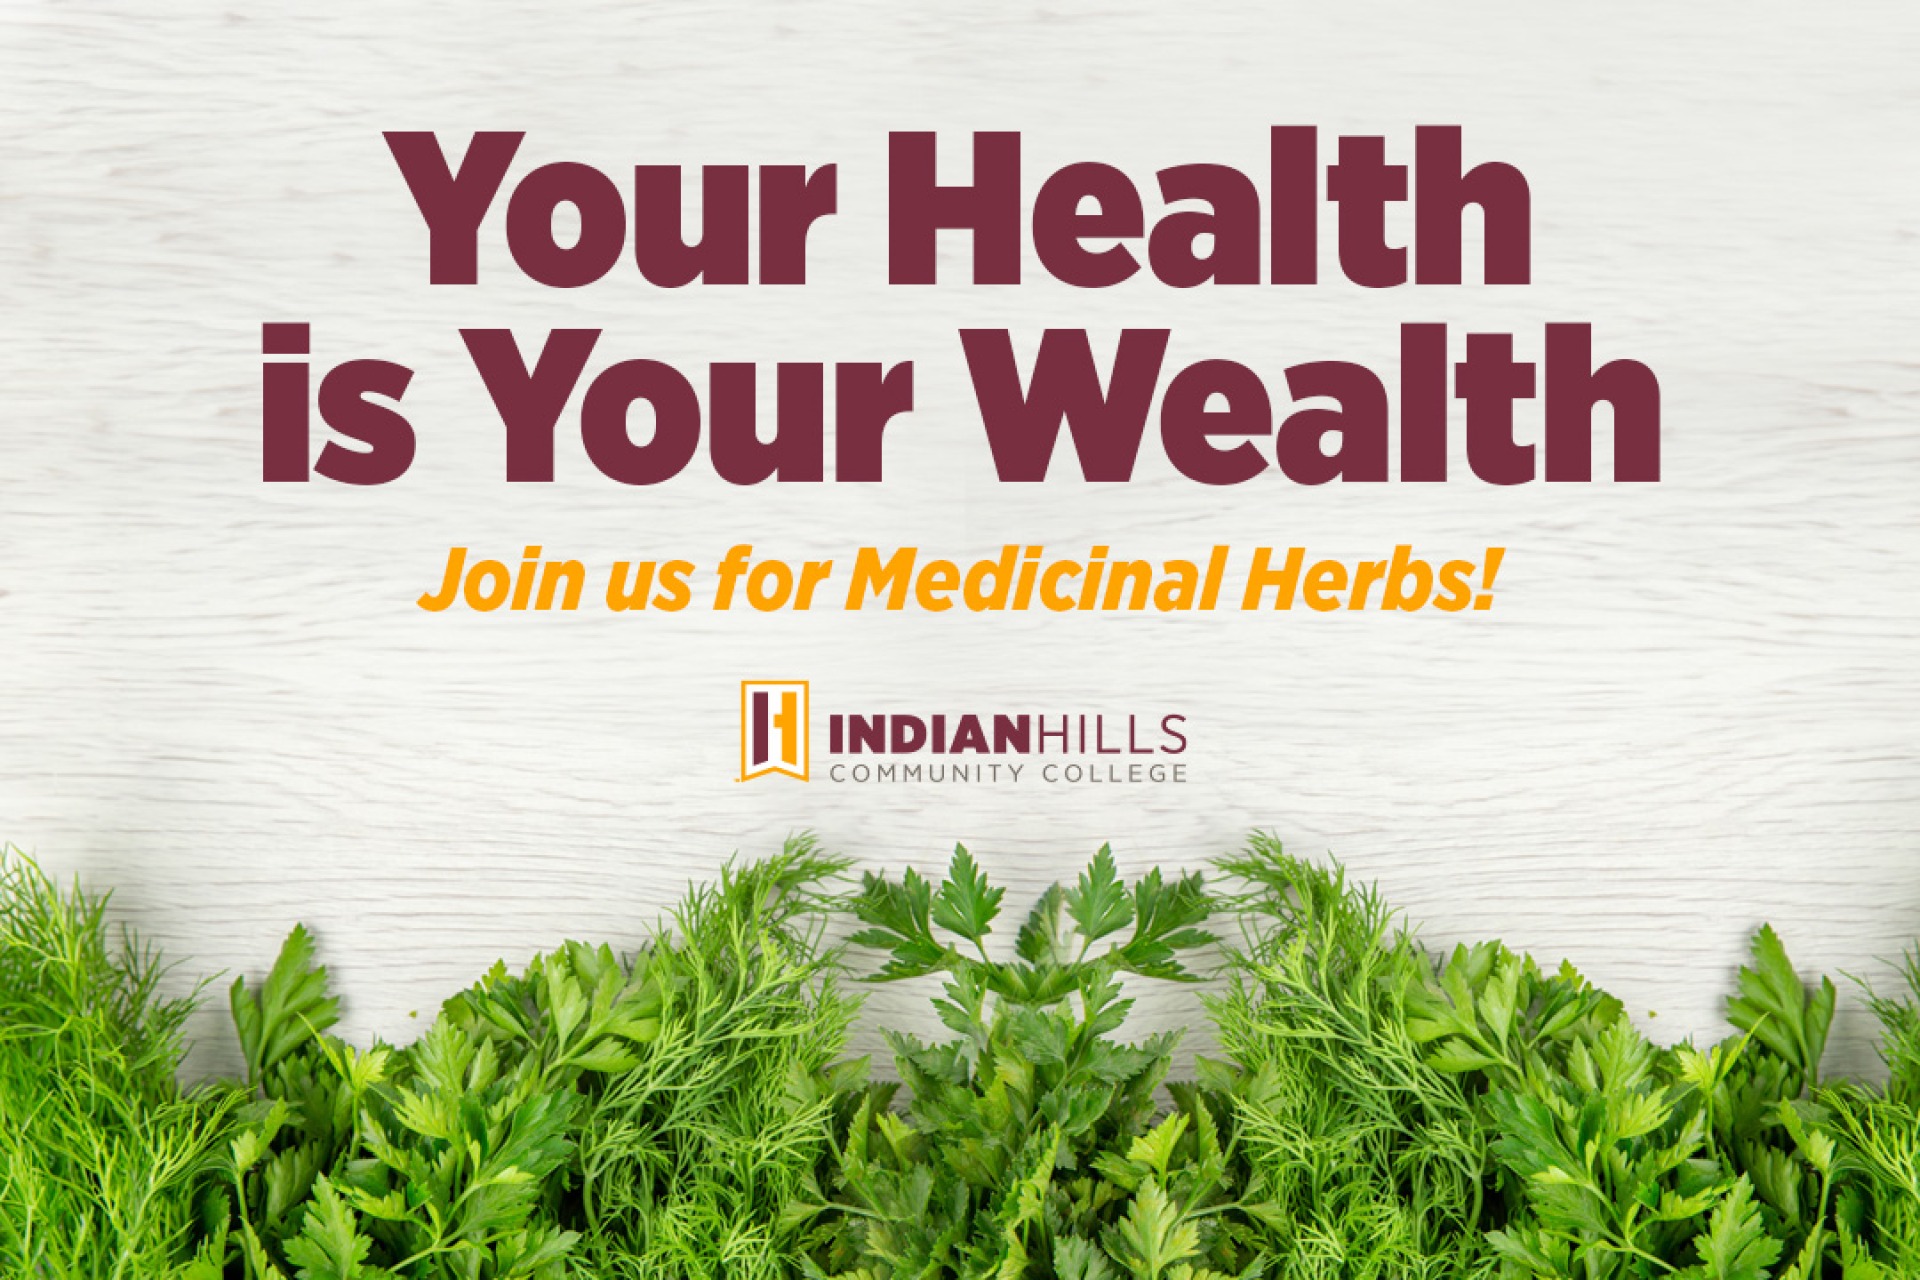 Your Health is Your Wealth - Medicinal Herbs Presentation